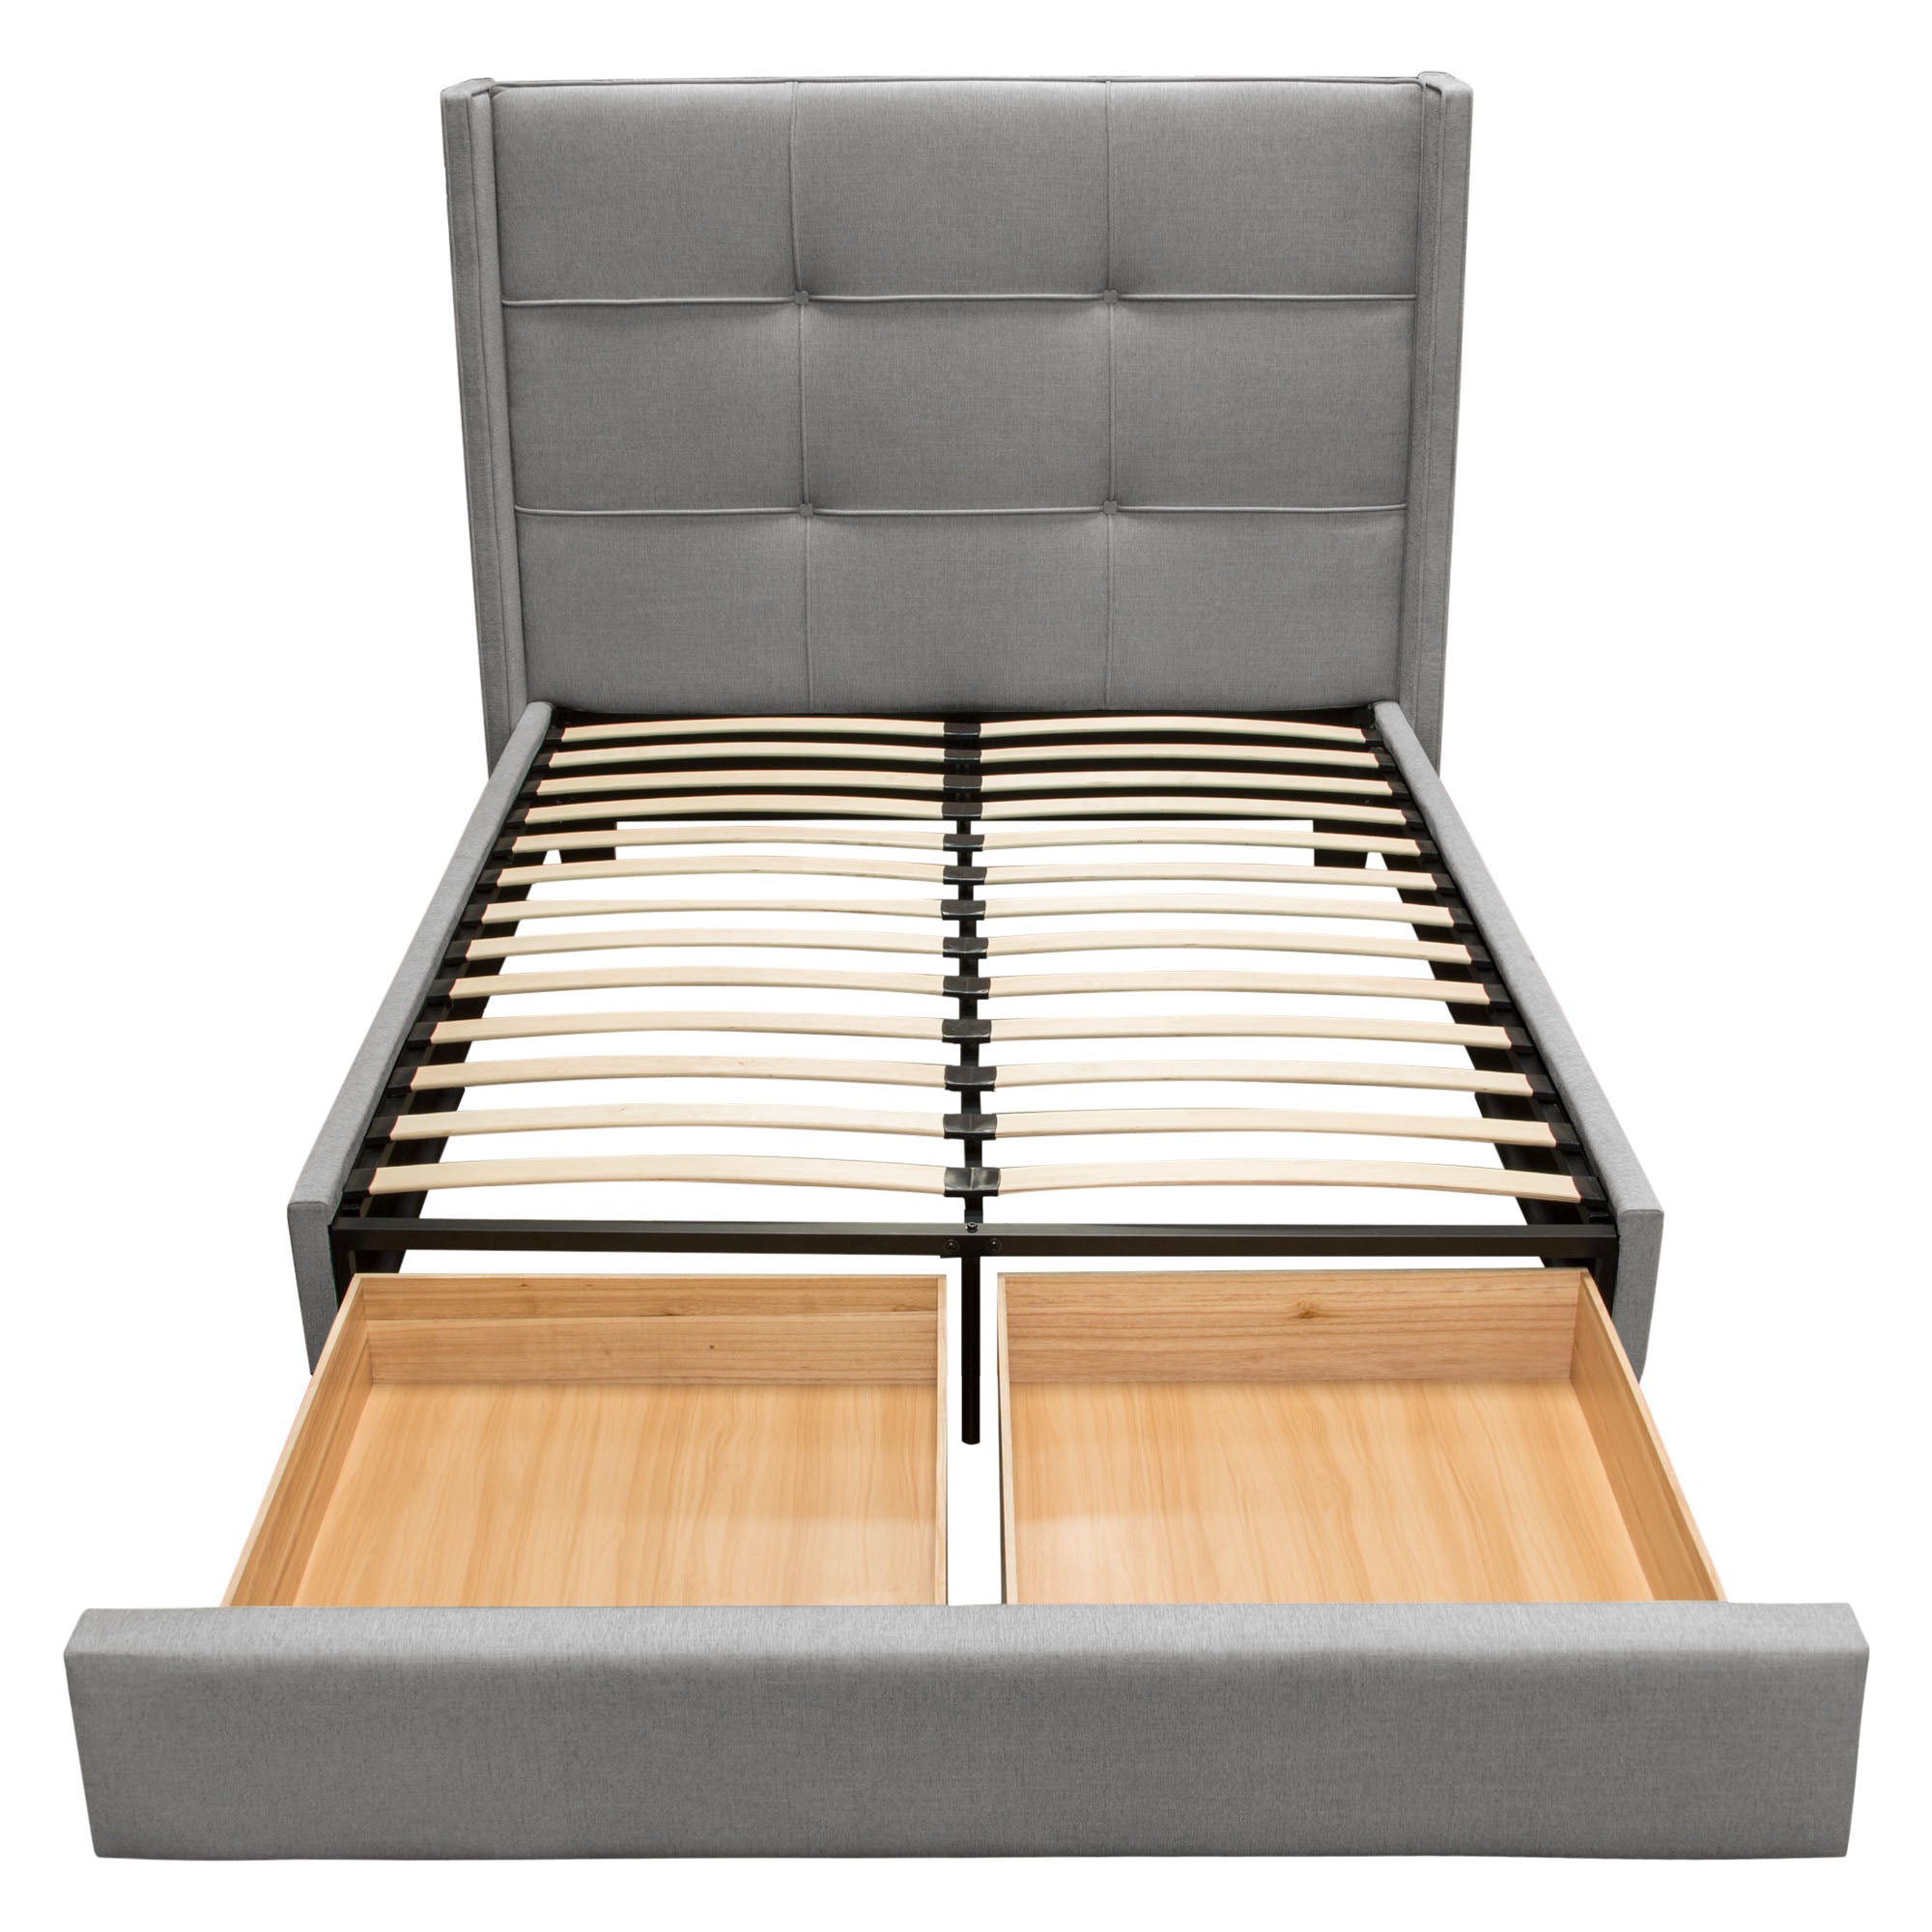 Beverly Bed With Storage - Grey